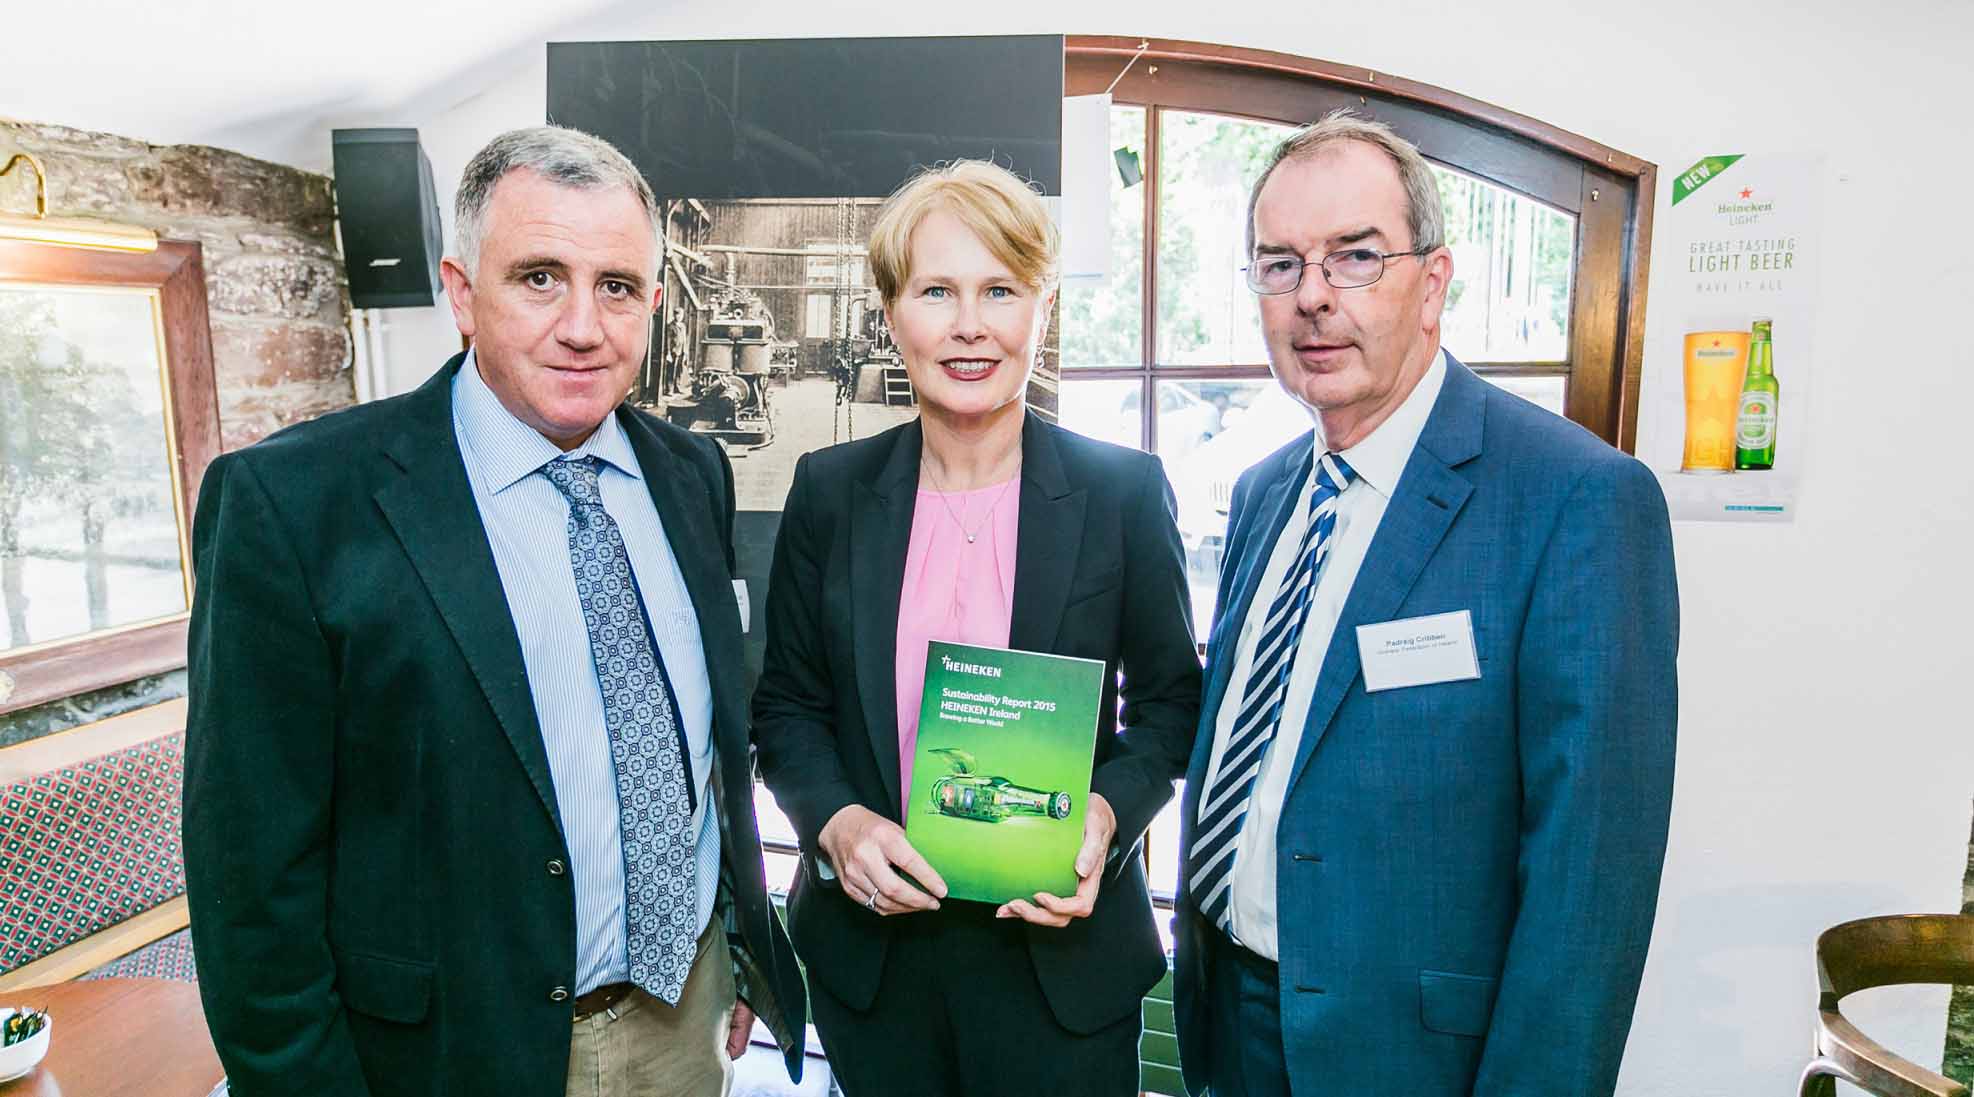 At the launch of its 2015 sustainability report as part of Heineken Ireland’s 160th anniversary are (from left): VFI County Chairman Michael Farrell with Heineken Ireland Chief Executive Maggie Timoney and VFI President Padraig Cribben.